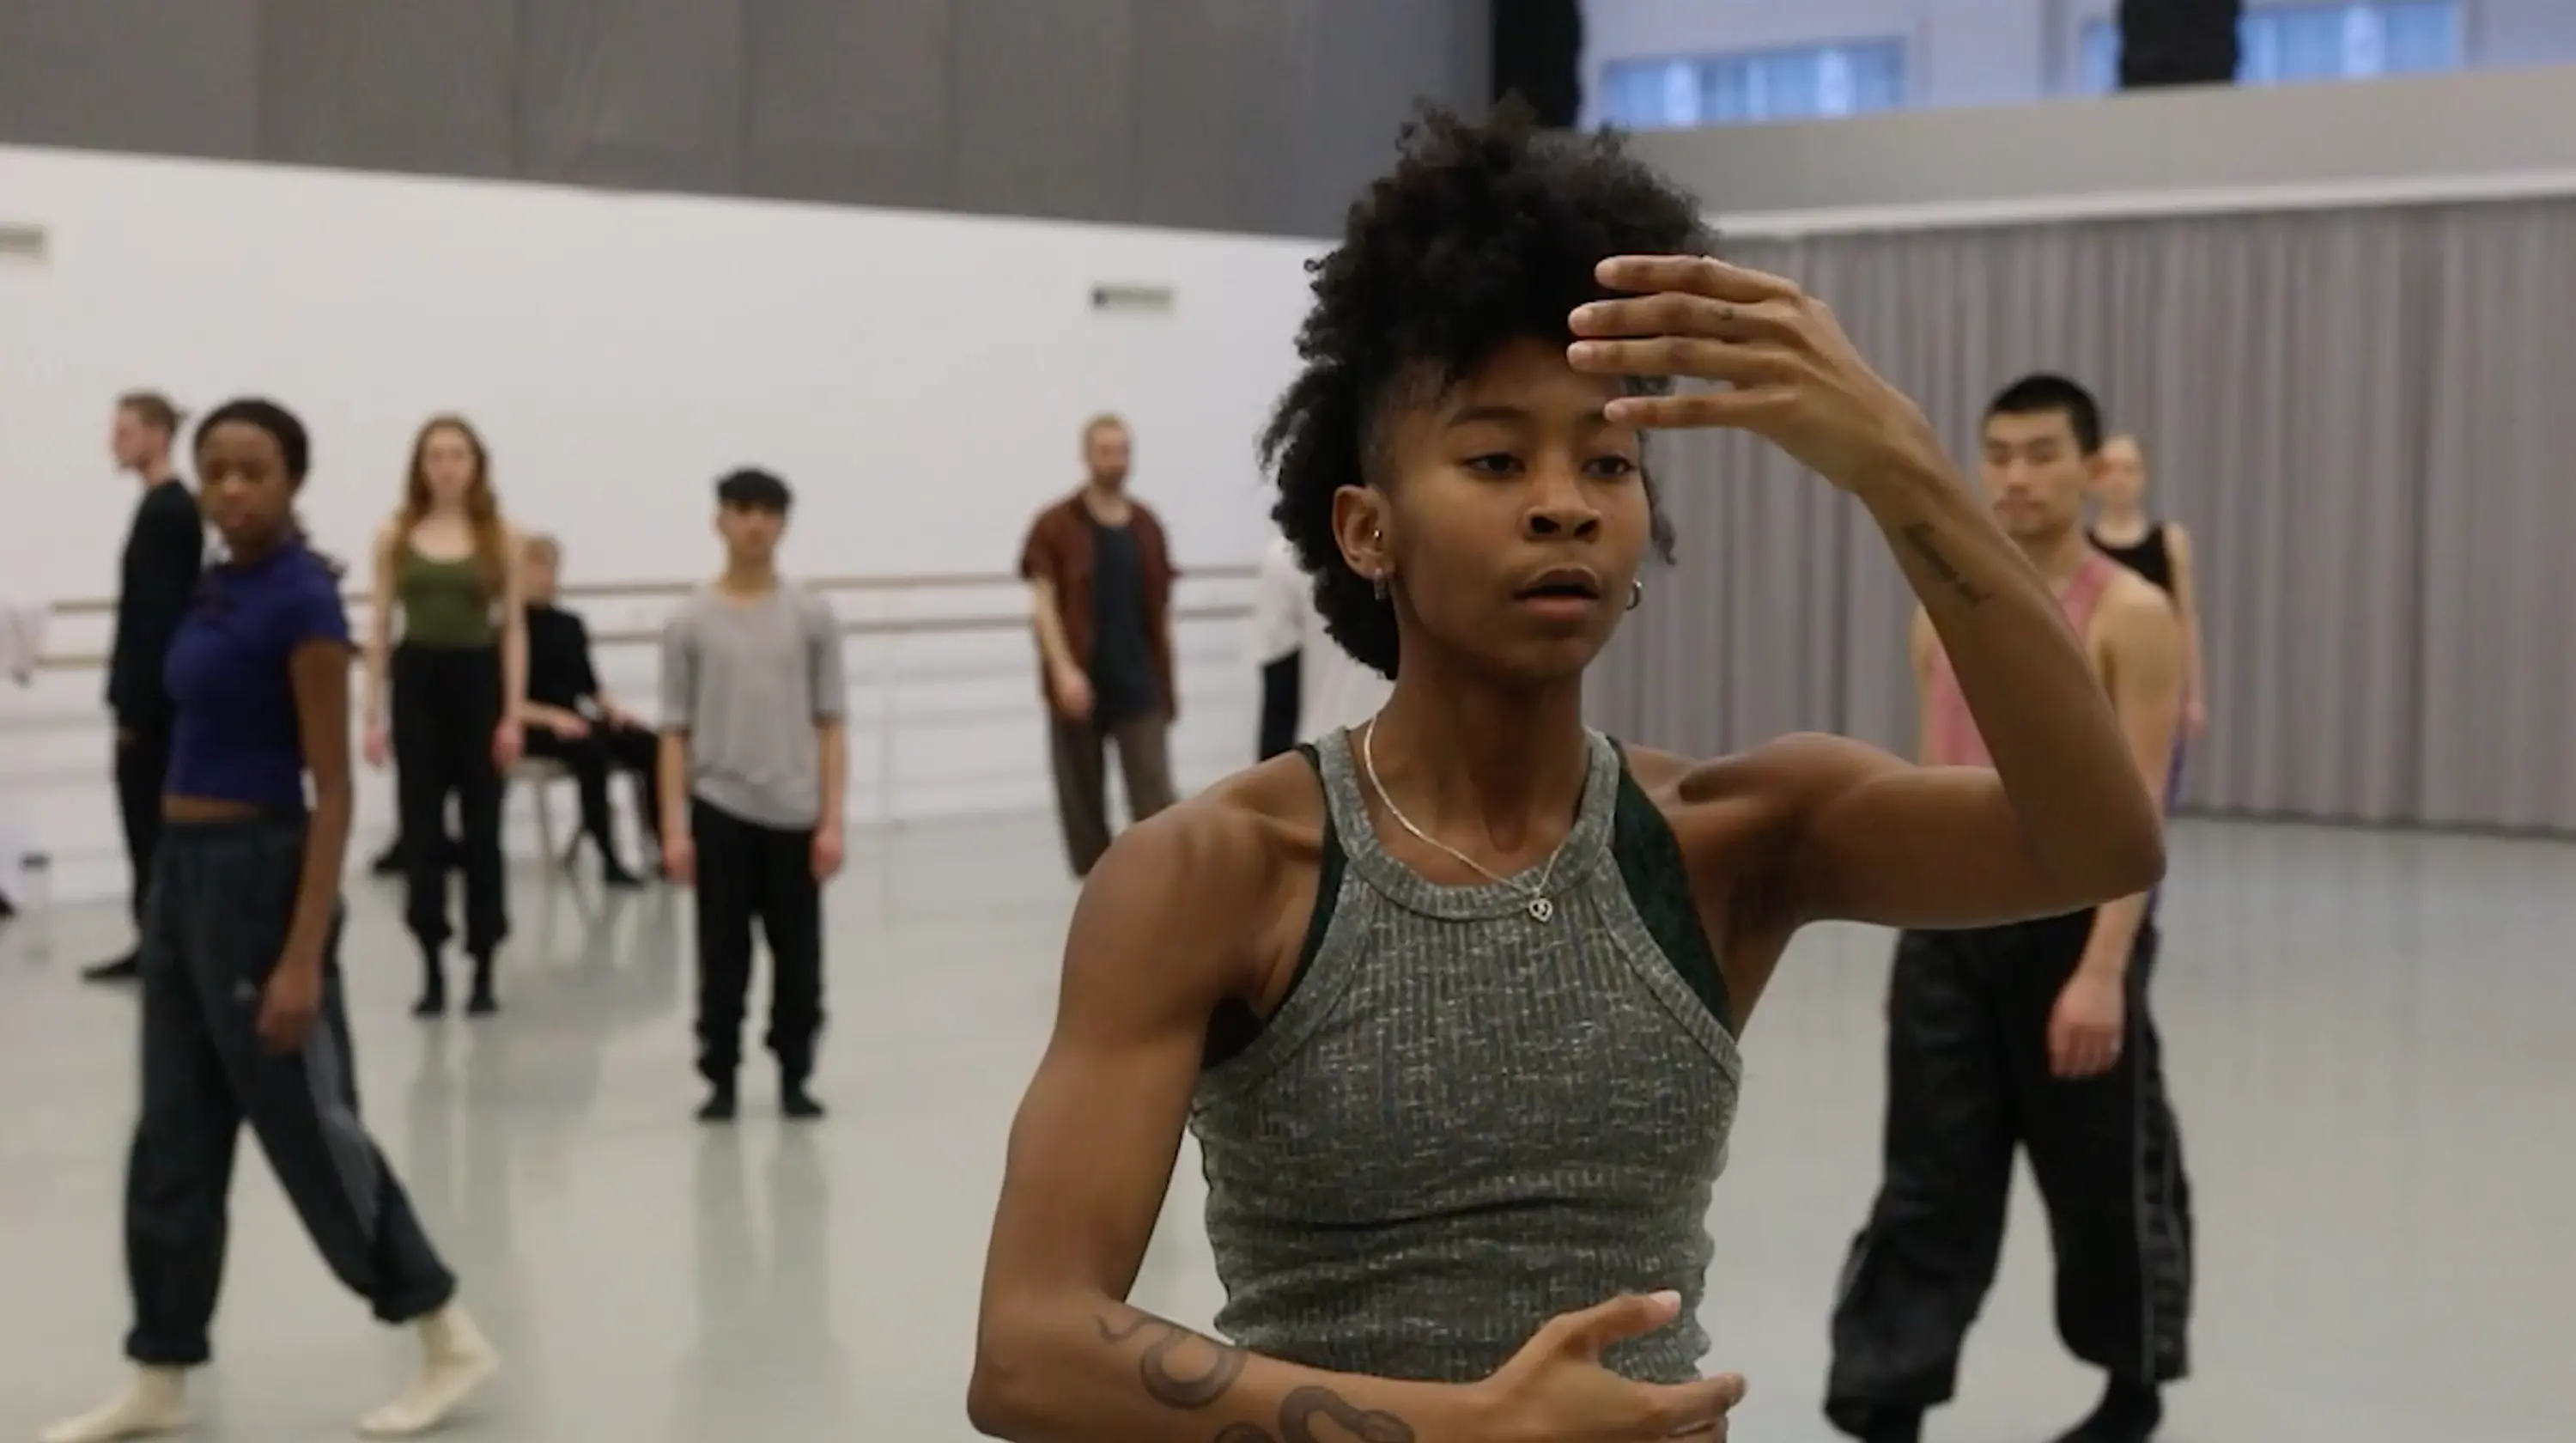 Rambert dancer, a black woman with curly hair, at the centre of the studio with a group of other dancers behind her.